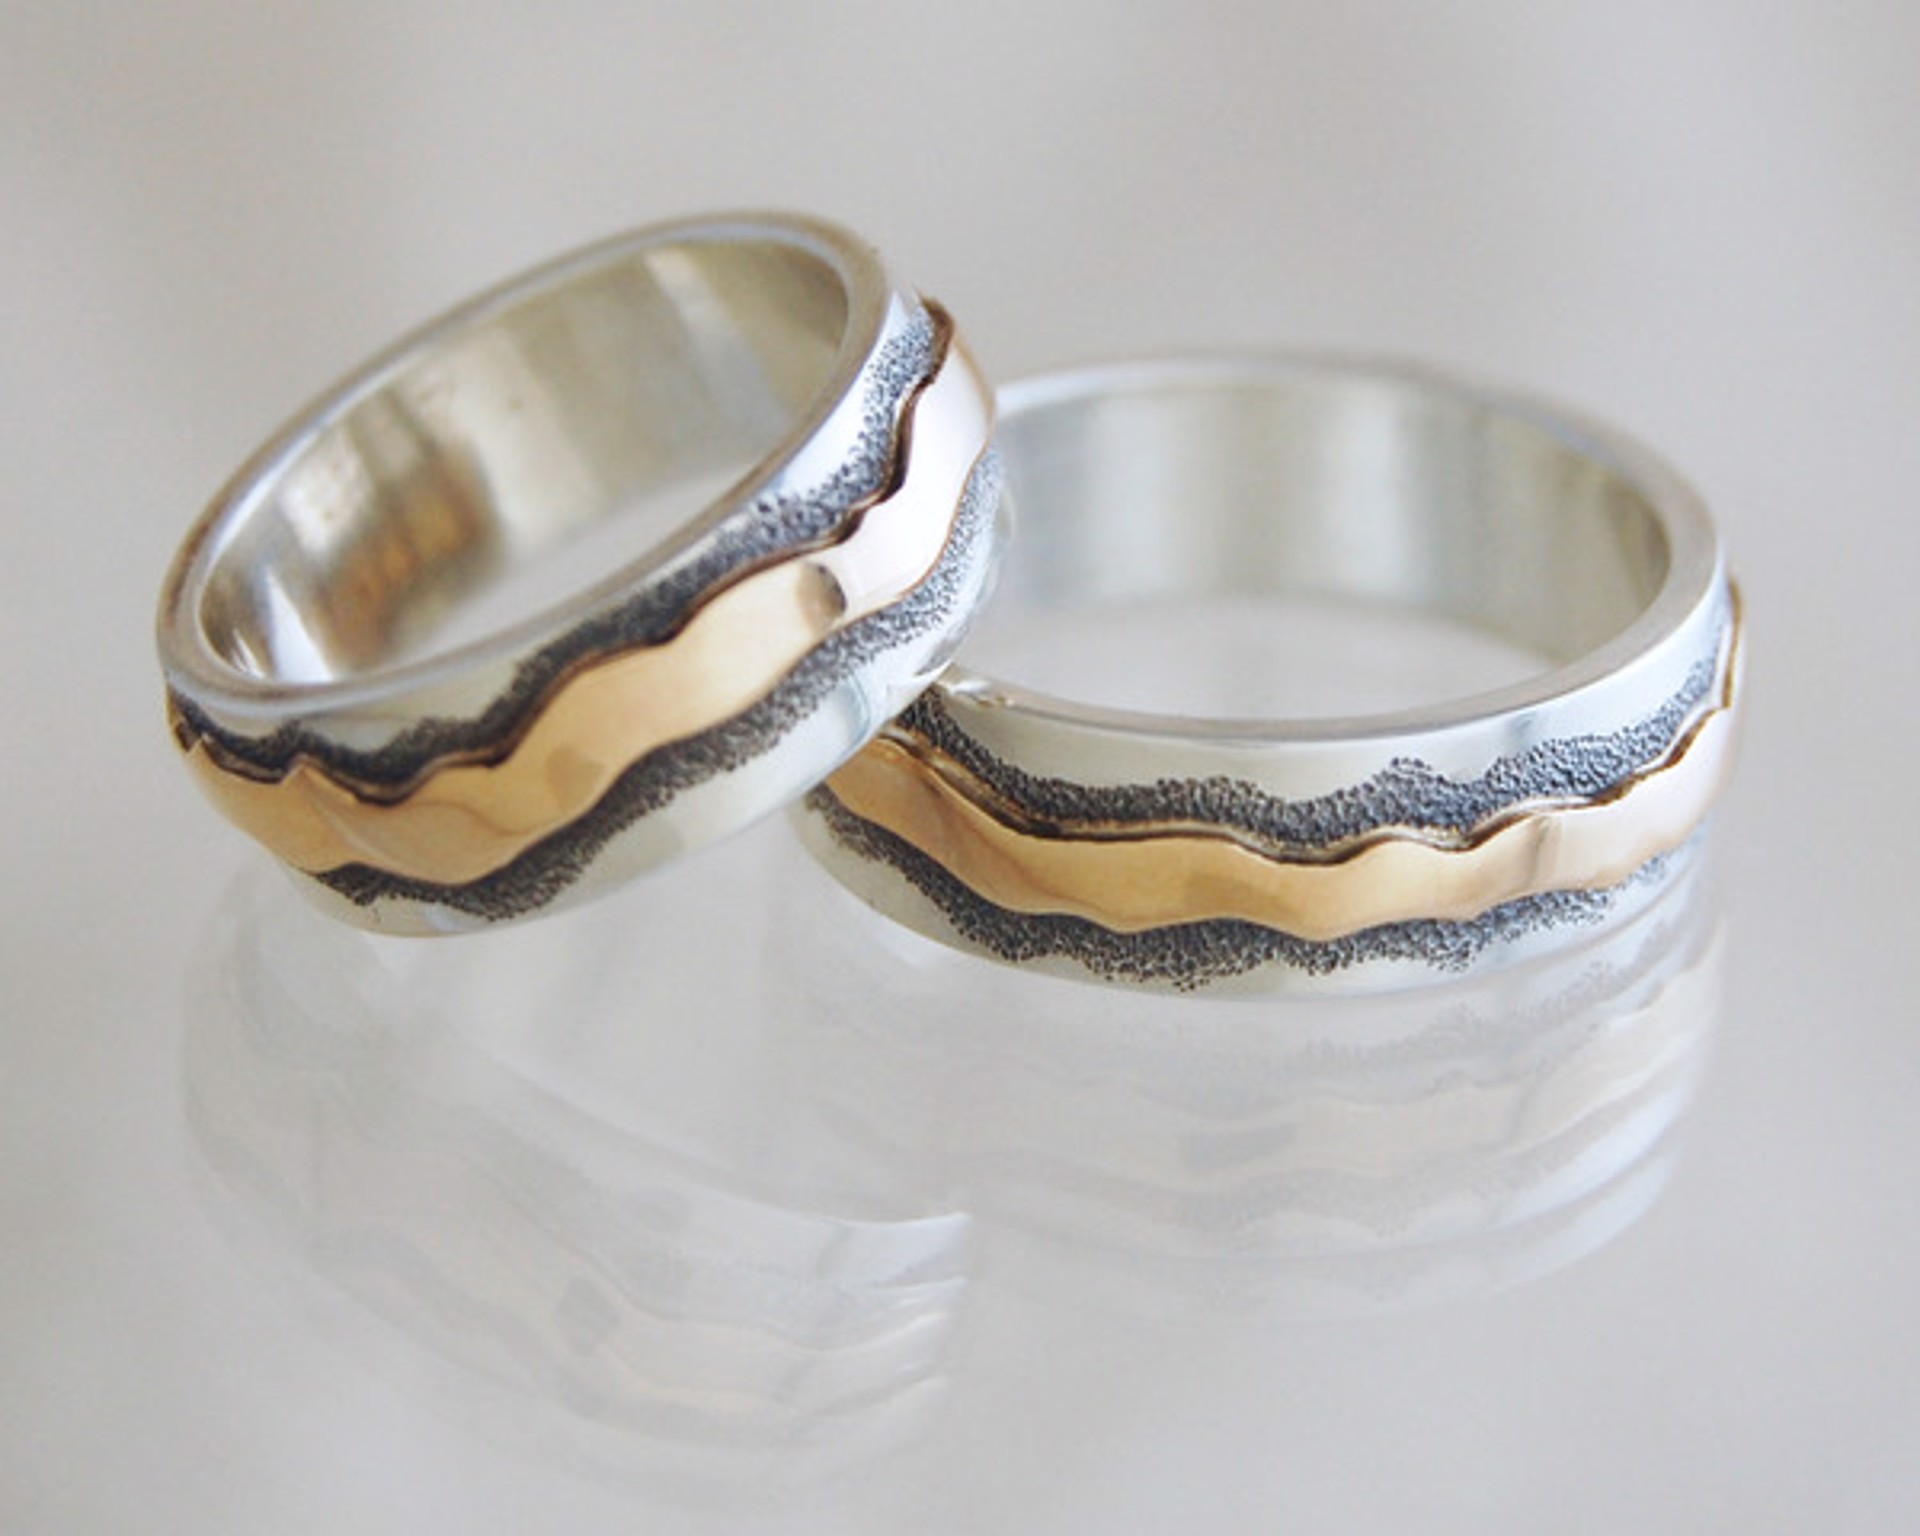 Ring - Seamless Band With Sterling Silver & 14K Size 7 - #465 by Ken and Barbara Newman